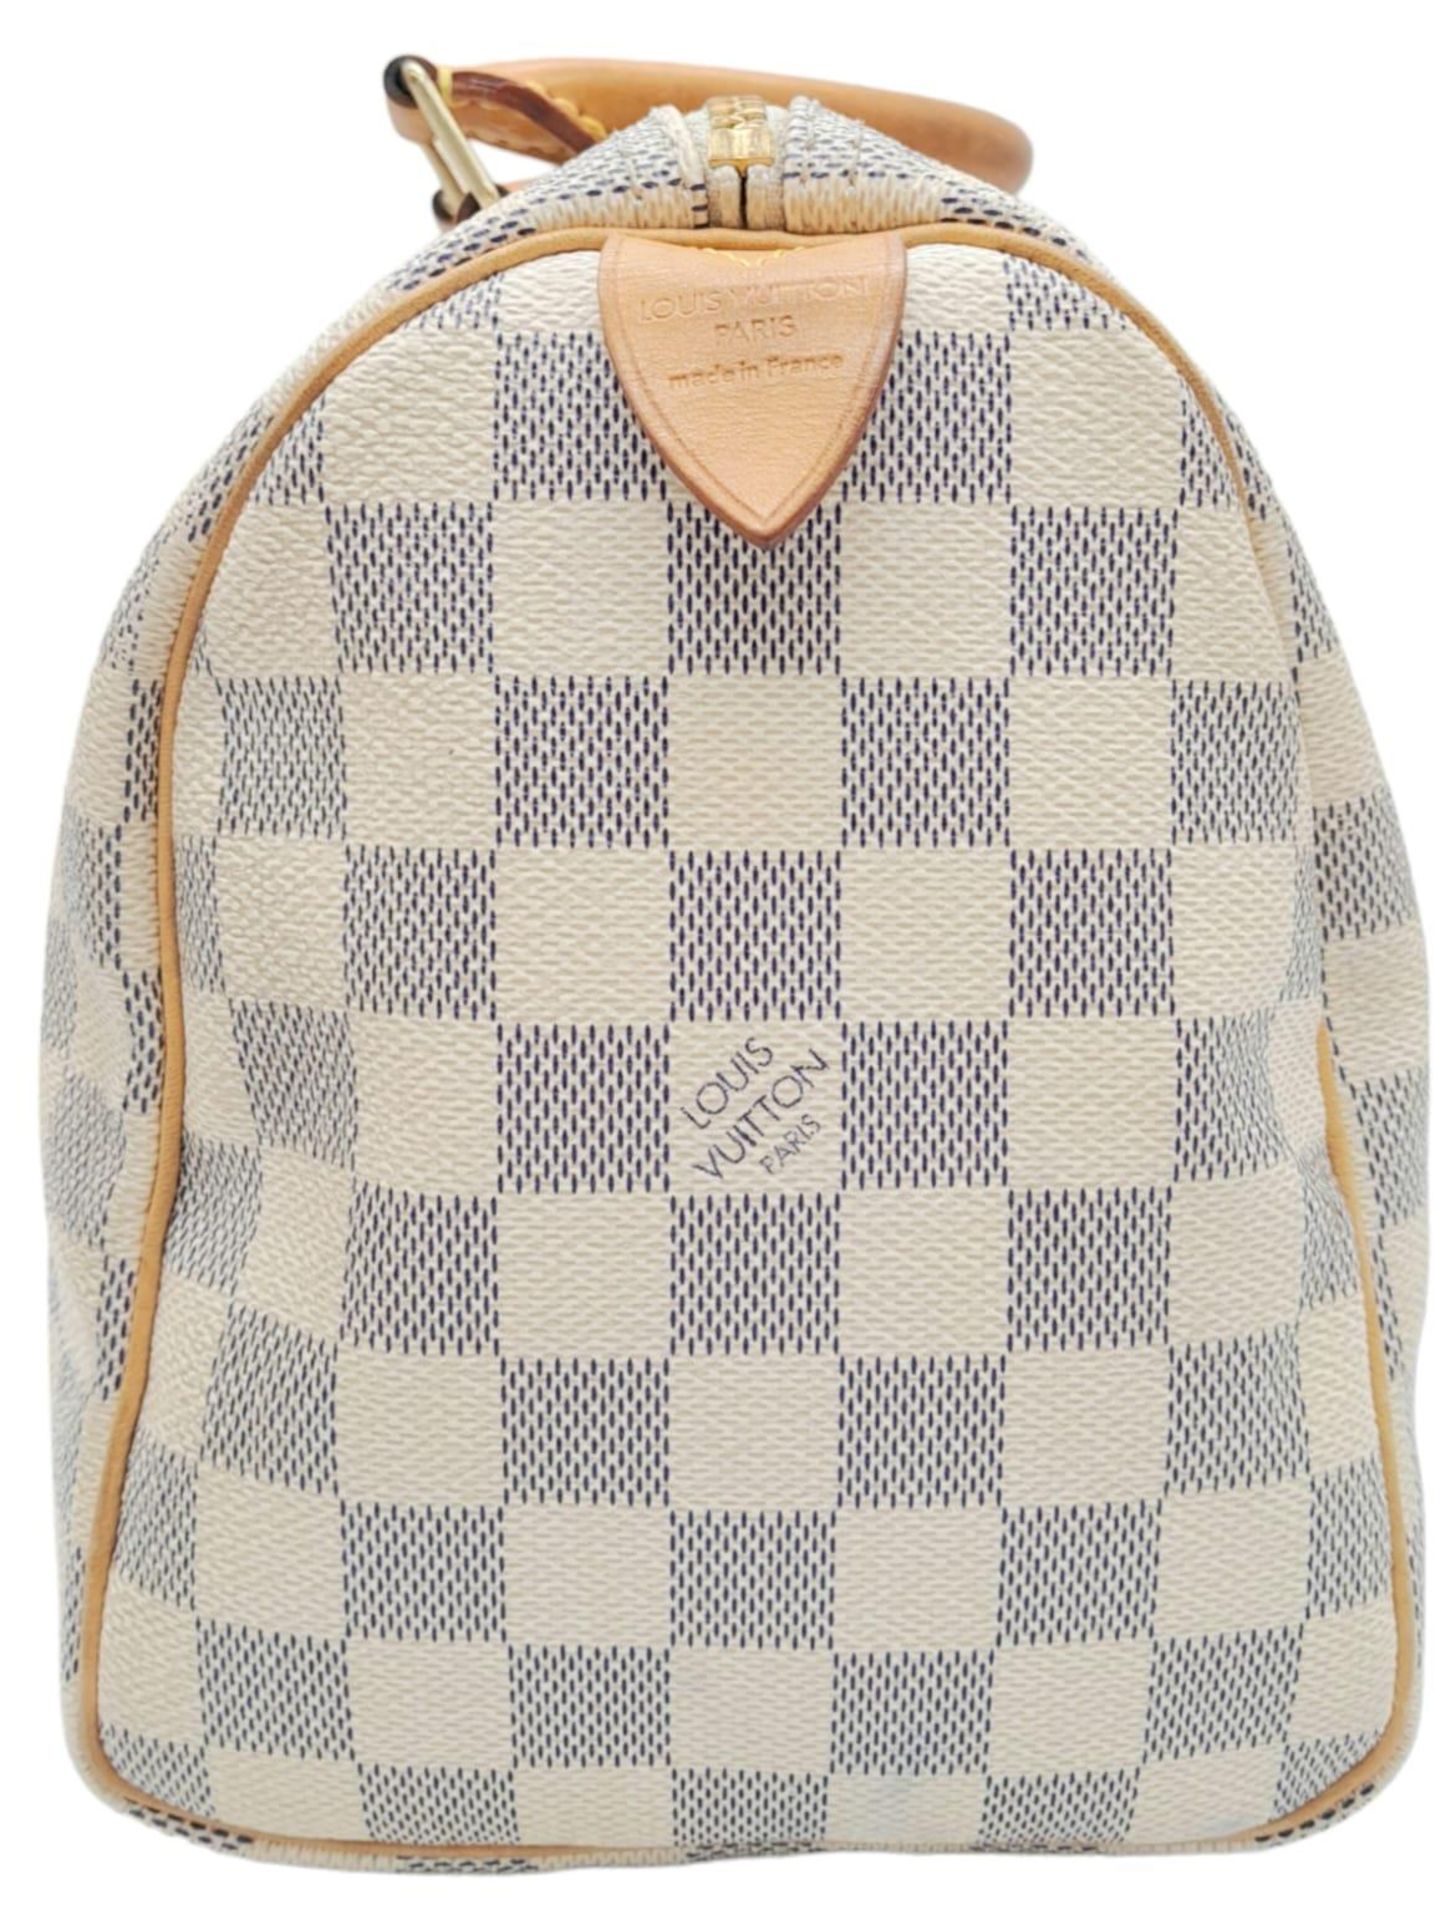 A Louis Vuitton White Canvas Damier Azur Speedy Handbag. Leather exterior, Rolled leather handles, a - Image 3 of 7